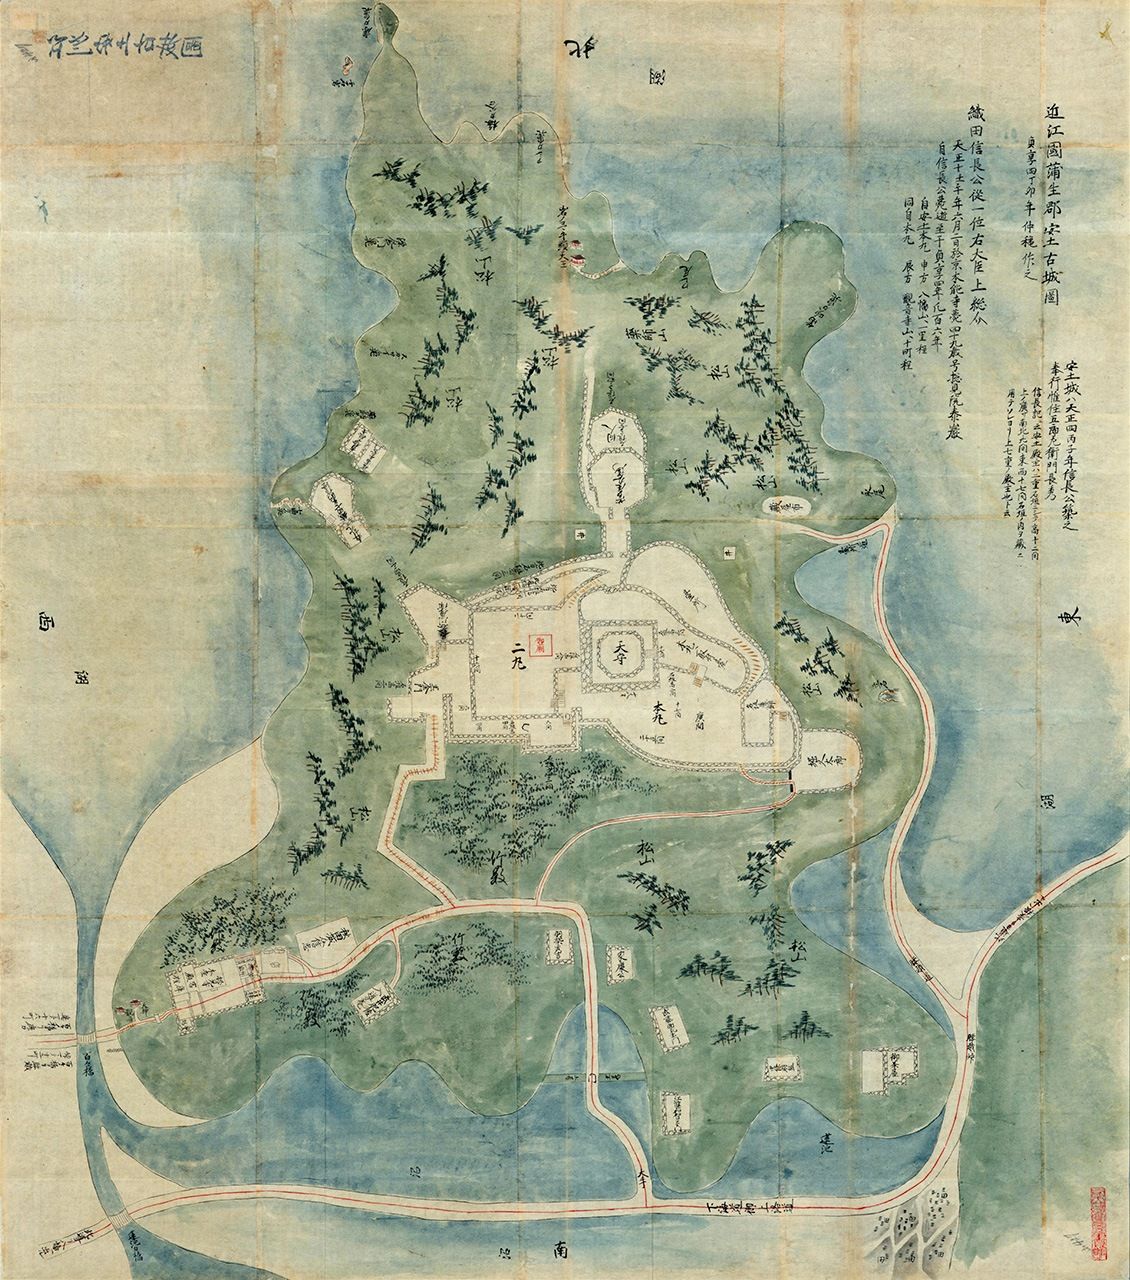 This is thought to be the oldest existing illustration that depicts the remains of Azuchi Castle and appears in Nihon kojō ezu gōshū azuchi kojō-zu, a pictorial map of old Japanese castles created in the mid-to-late Edo period (1603–1868). (Courtesy National Diet Library)